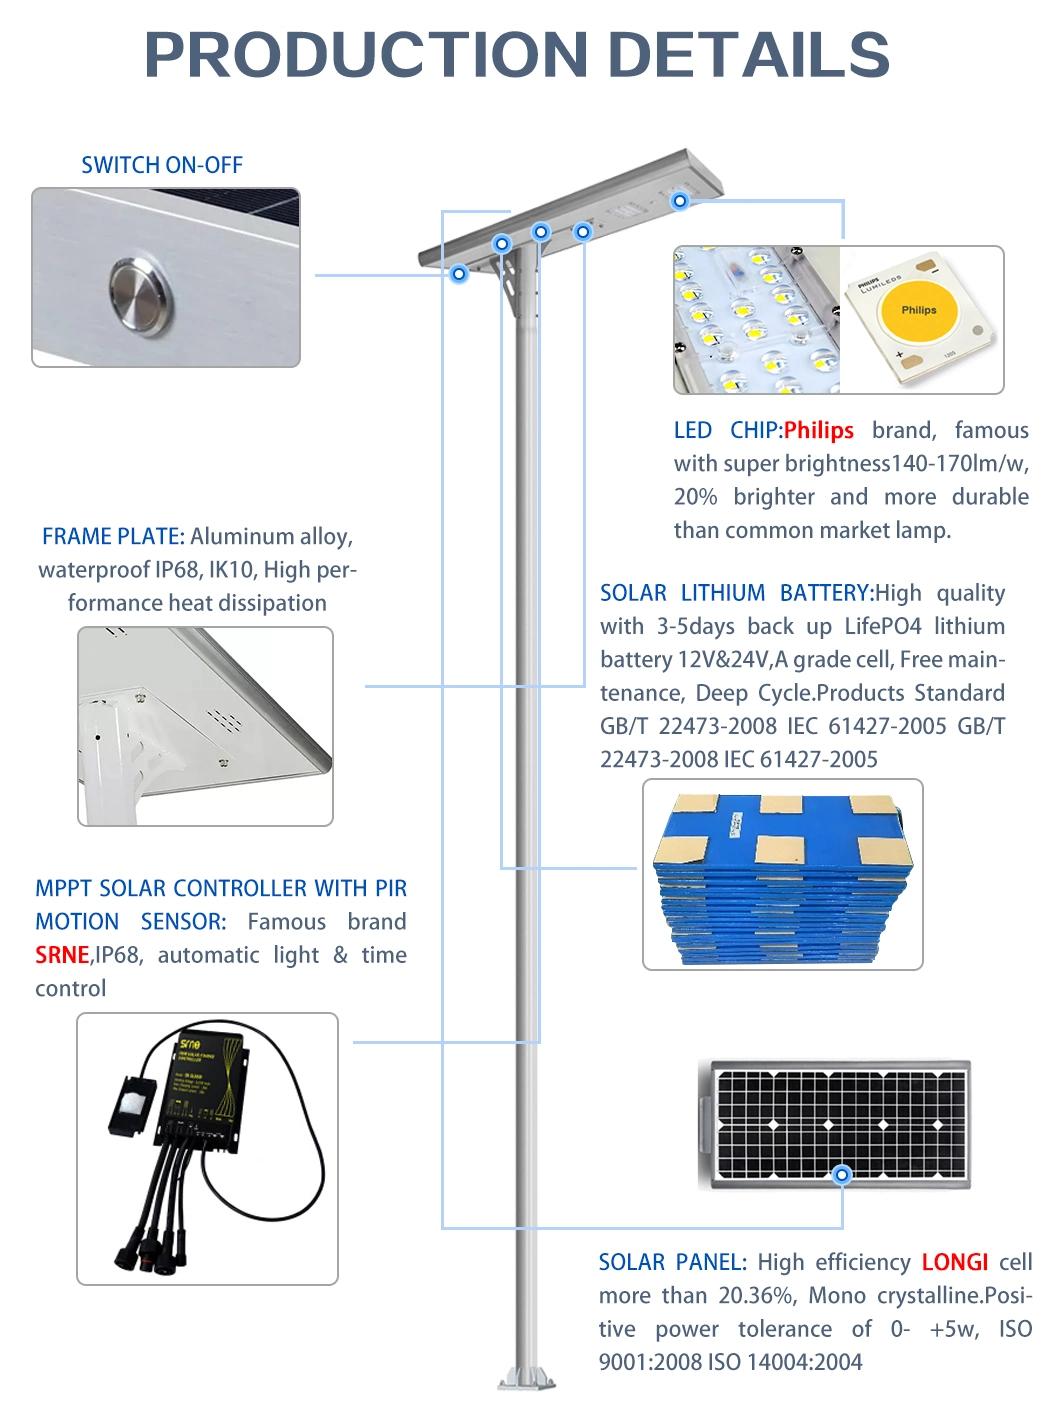 Hot Products Die Cast Aluminum Materials Pathway Light Outdoor IP65 Waterproof 100W All in One Solar Street Light with Remote Control